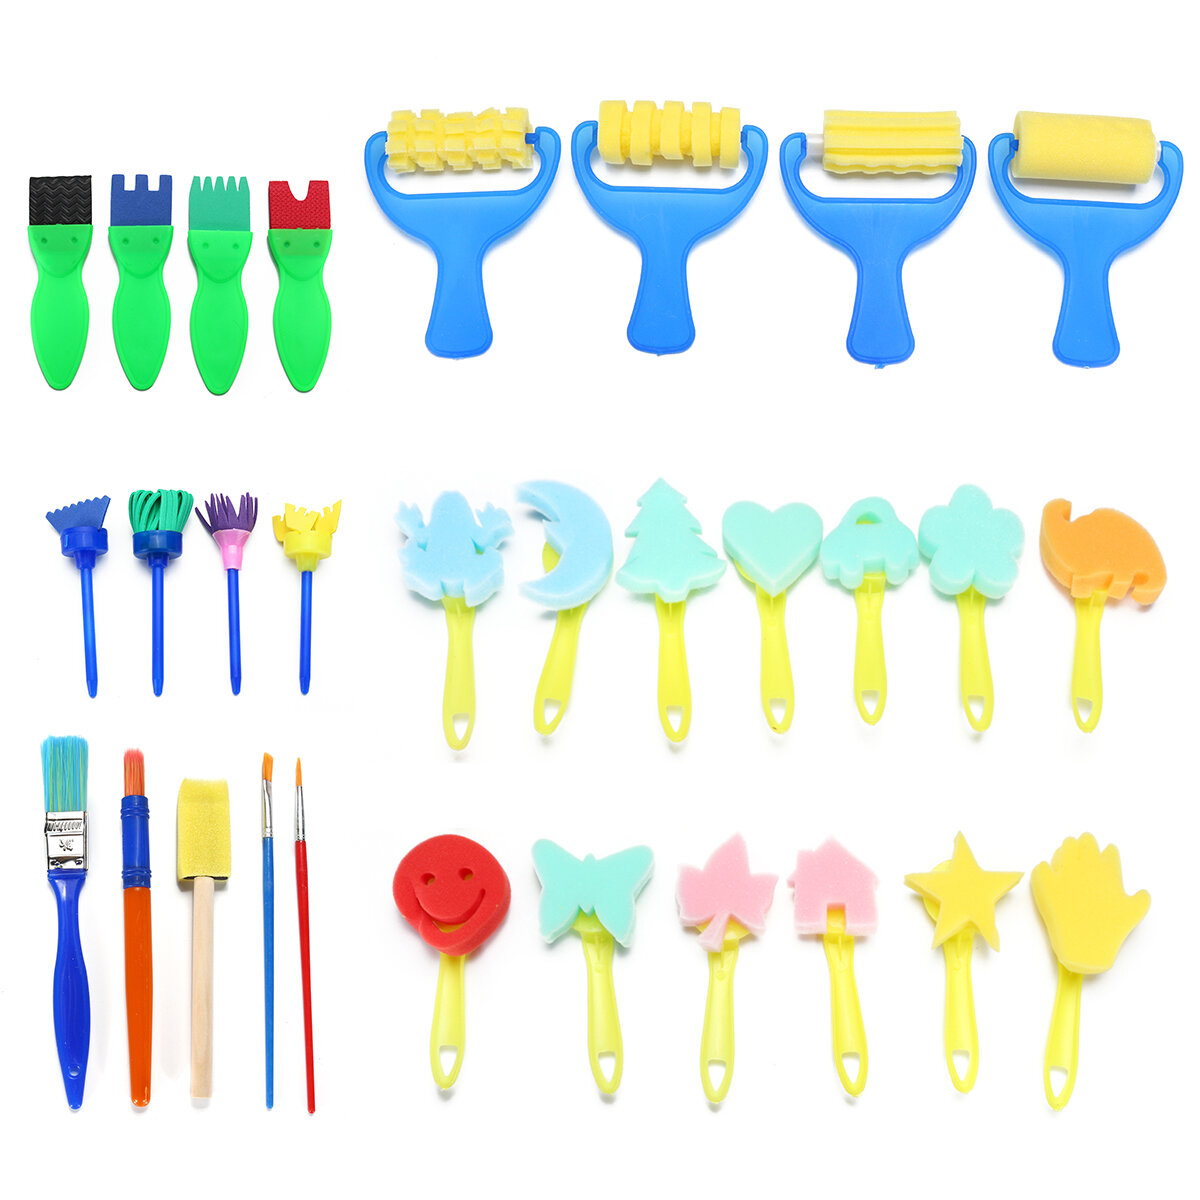 30pcs Child Paint Roller DIY Painting Toys Sponge Brush Kit Set Graffiti Drawing Tools for Kids Early Education Develop hands-on Ability